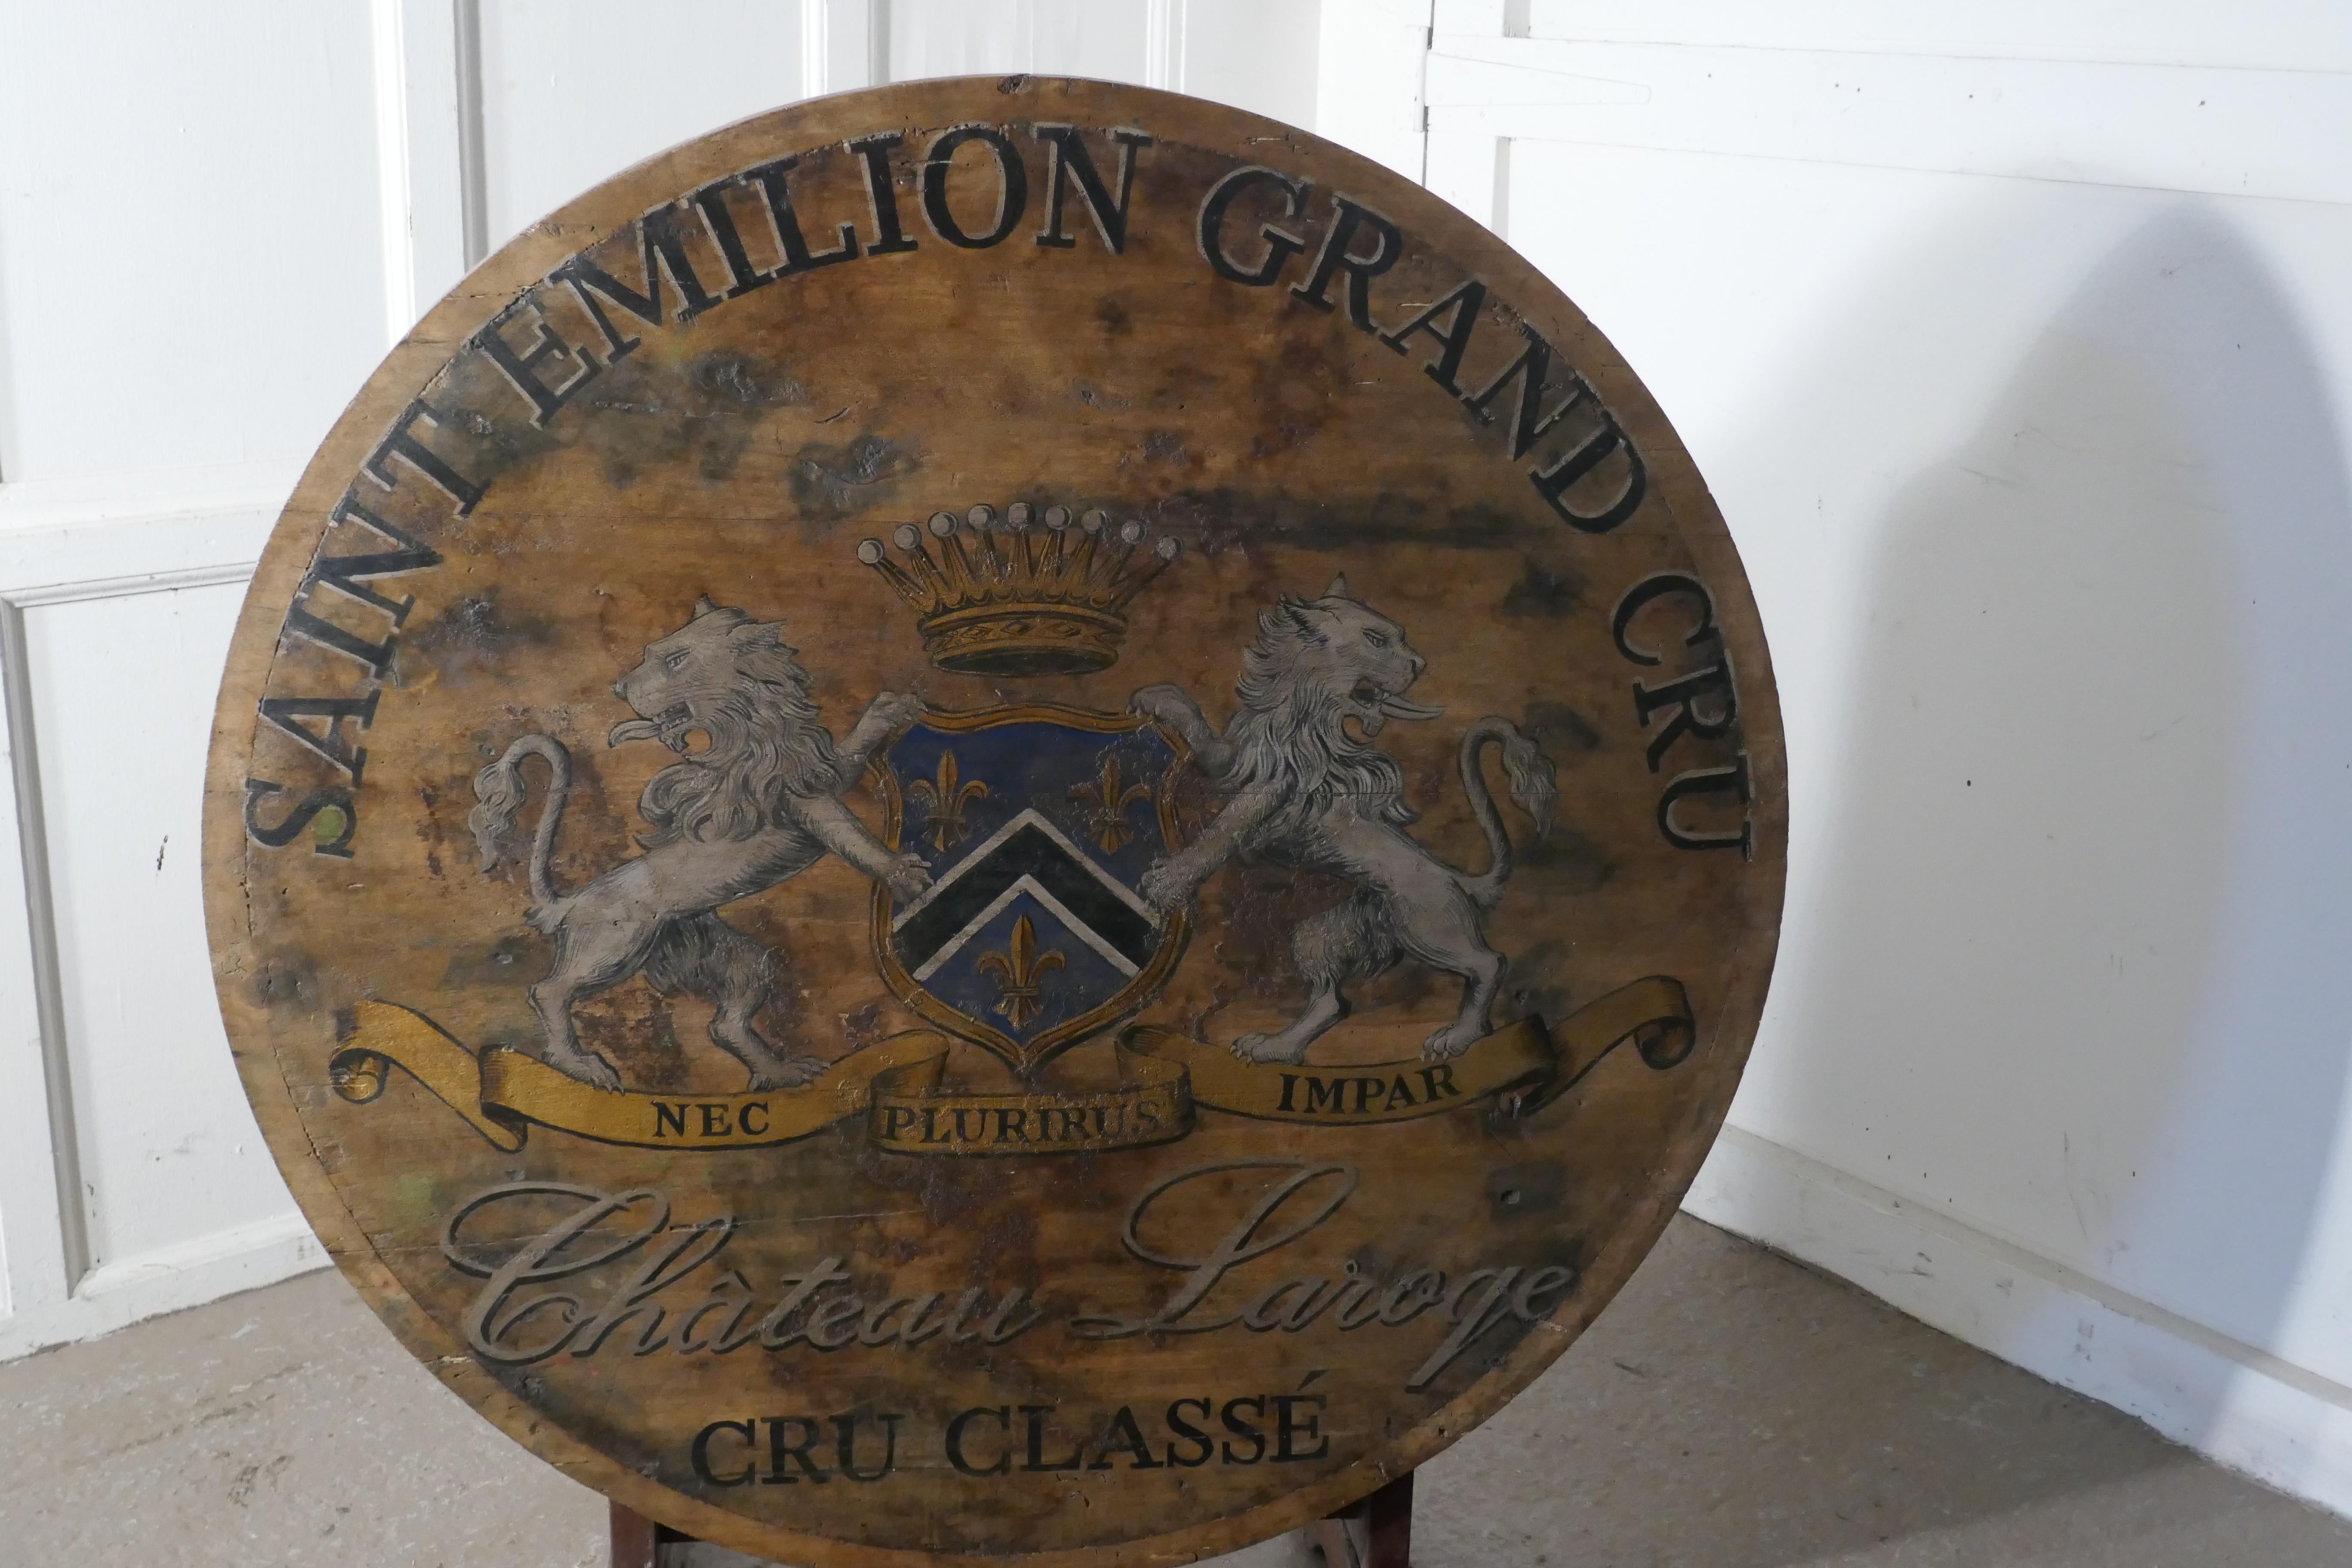 19th century French vineyard wine table from Chateau Laroge, Saint Emilion

This is an old wooden painted table, is painted with the coat of Arms of the Chateau Laroge, St Emillion and would have been used in the Chateau as a serving table for